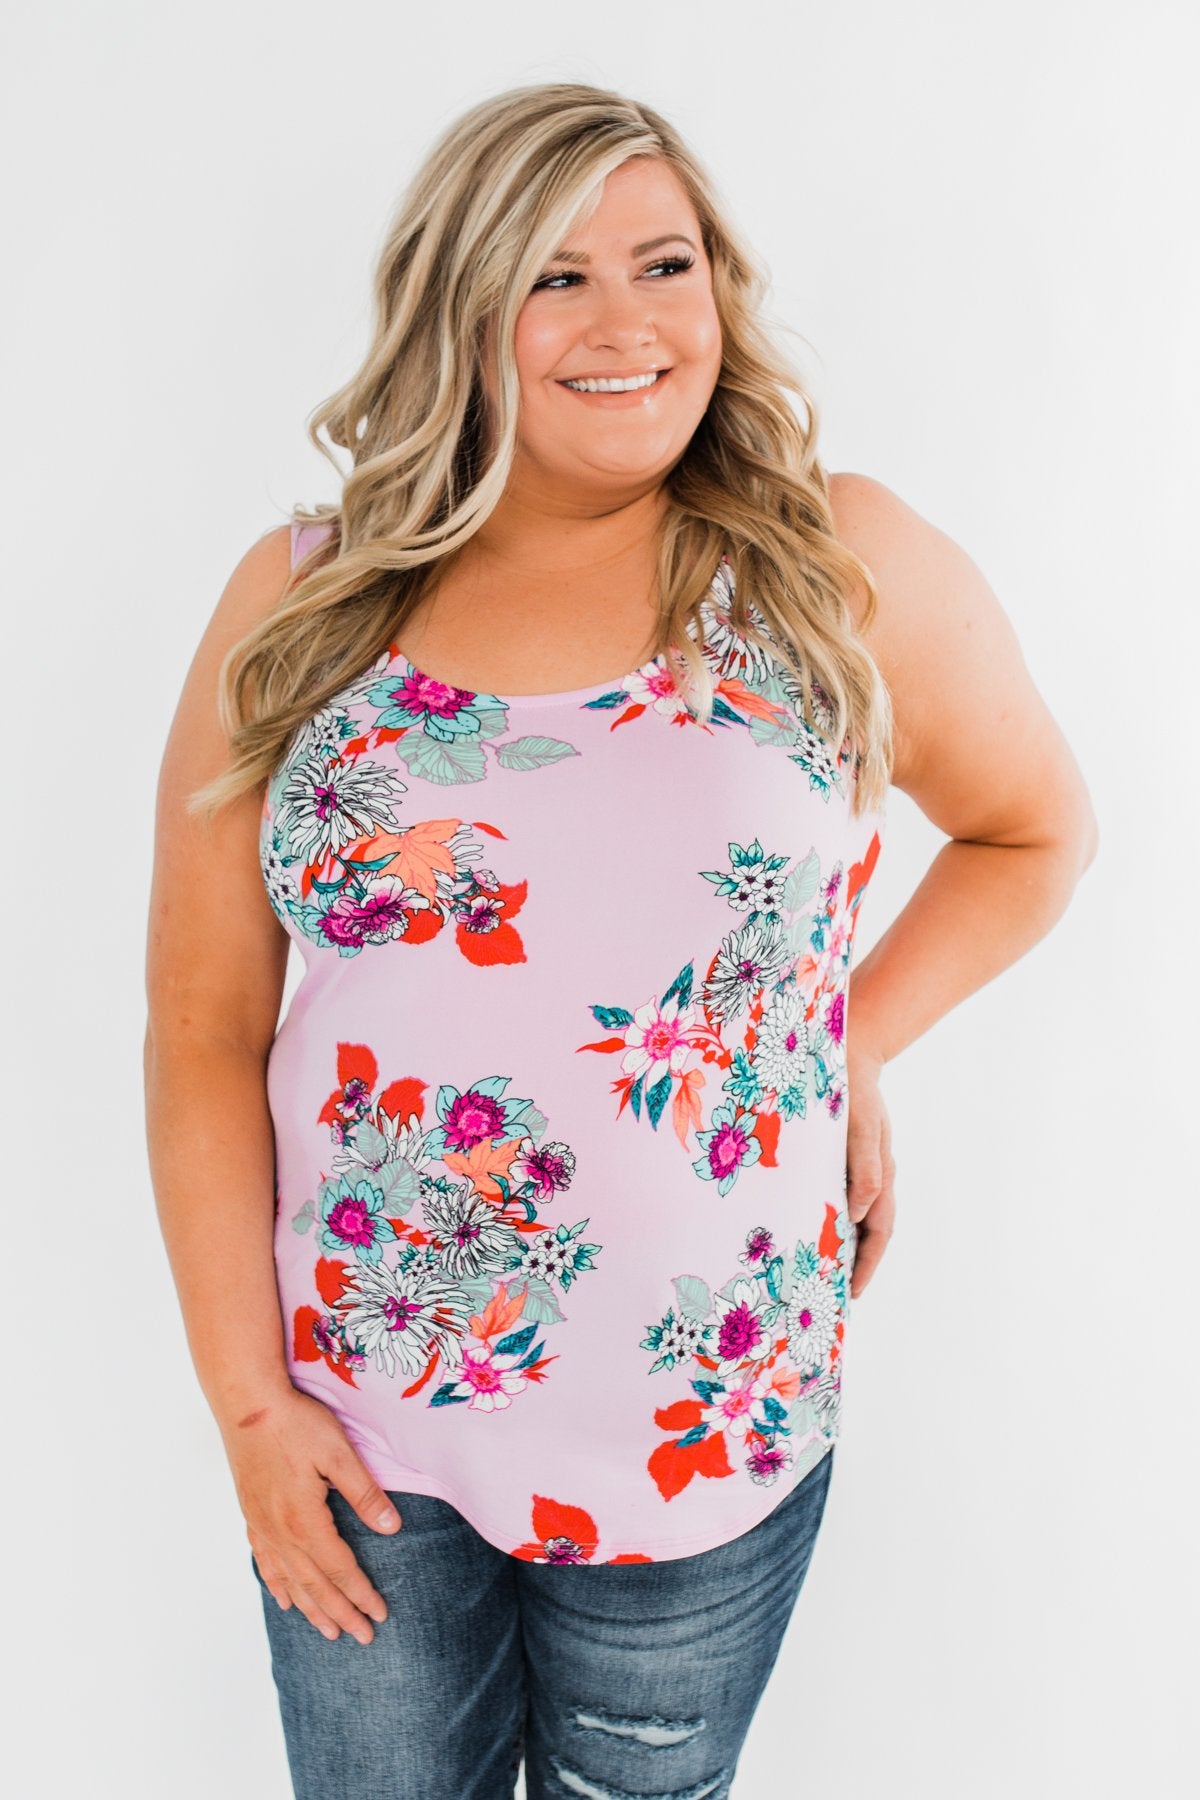 Waiting For You Floral Tank Top- Pink Lavender